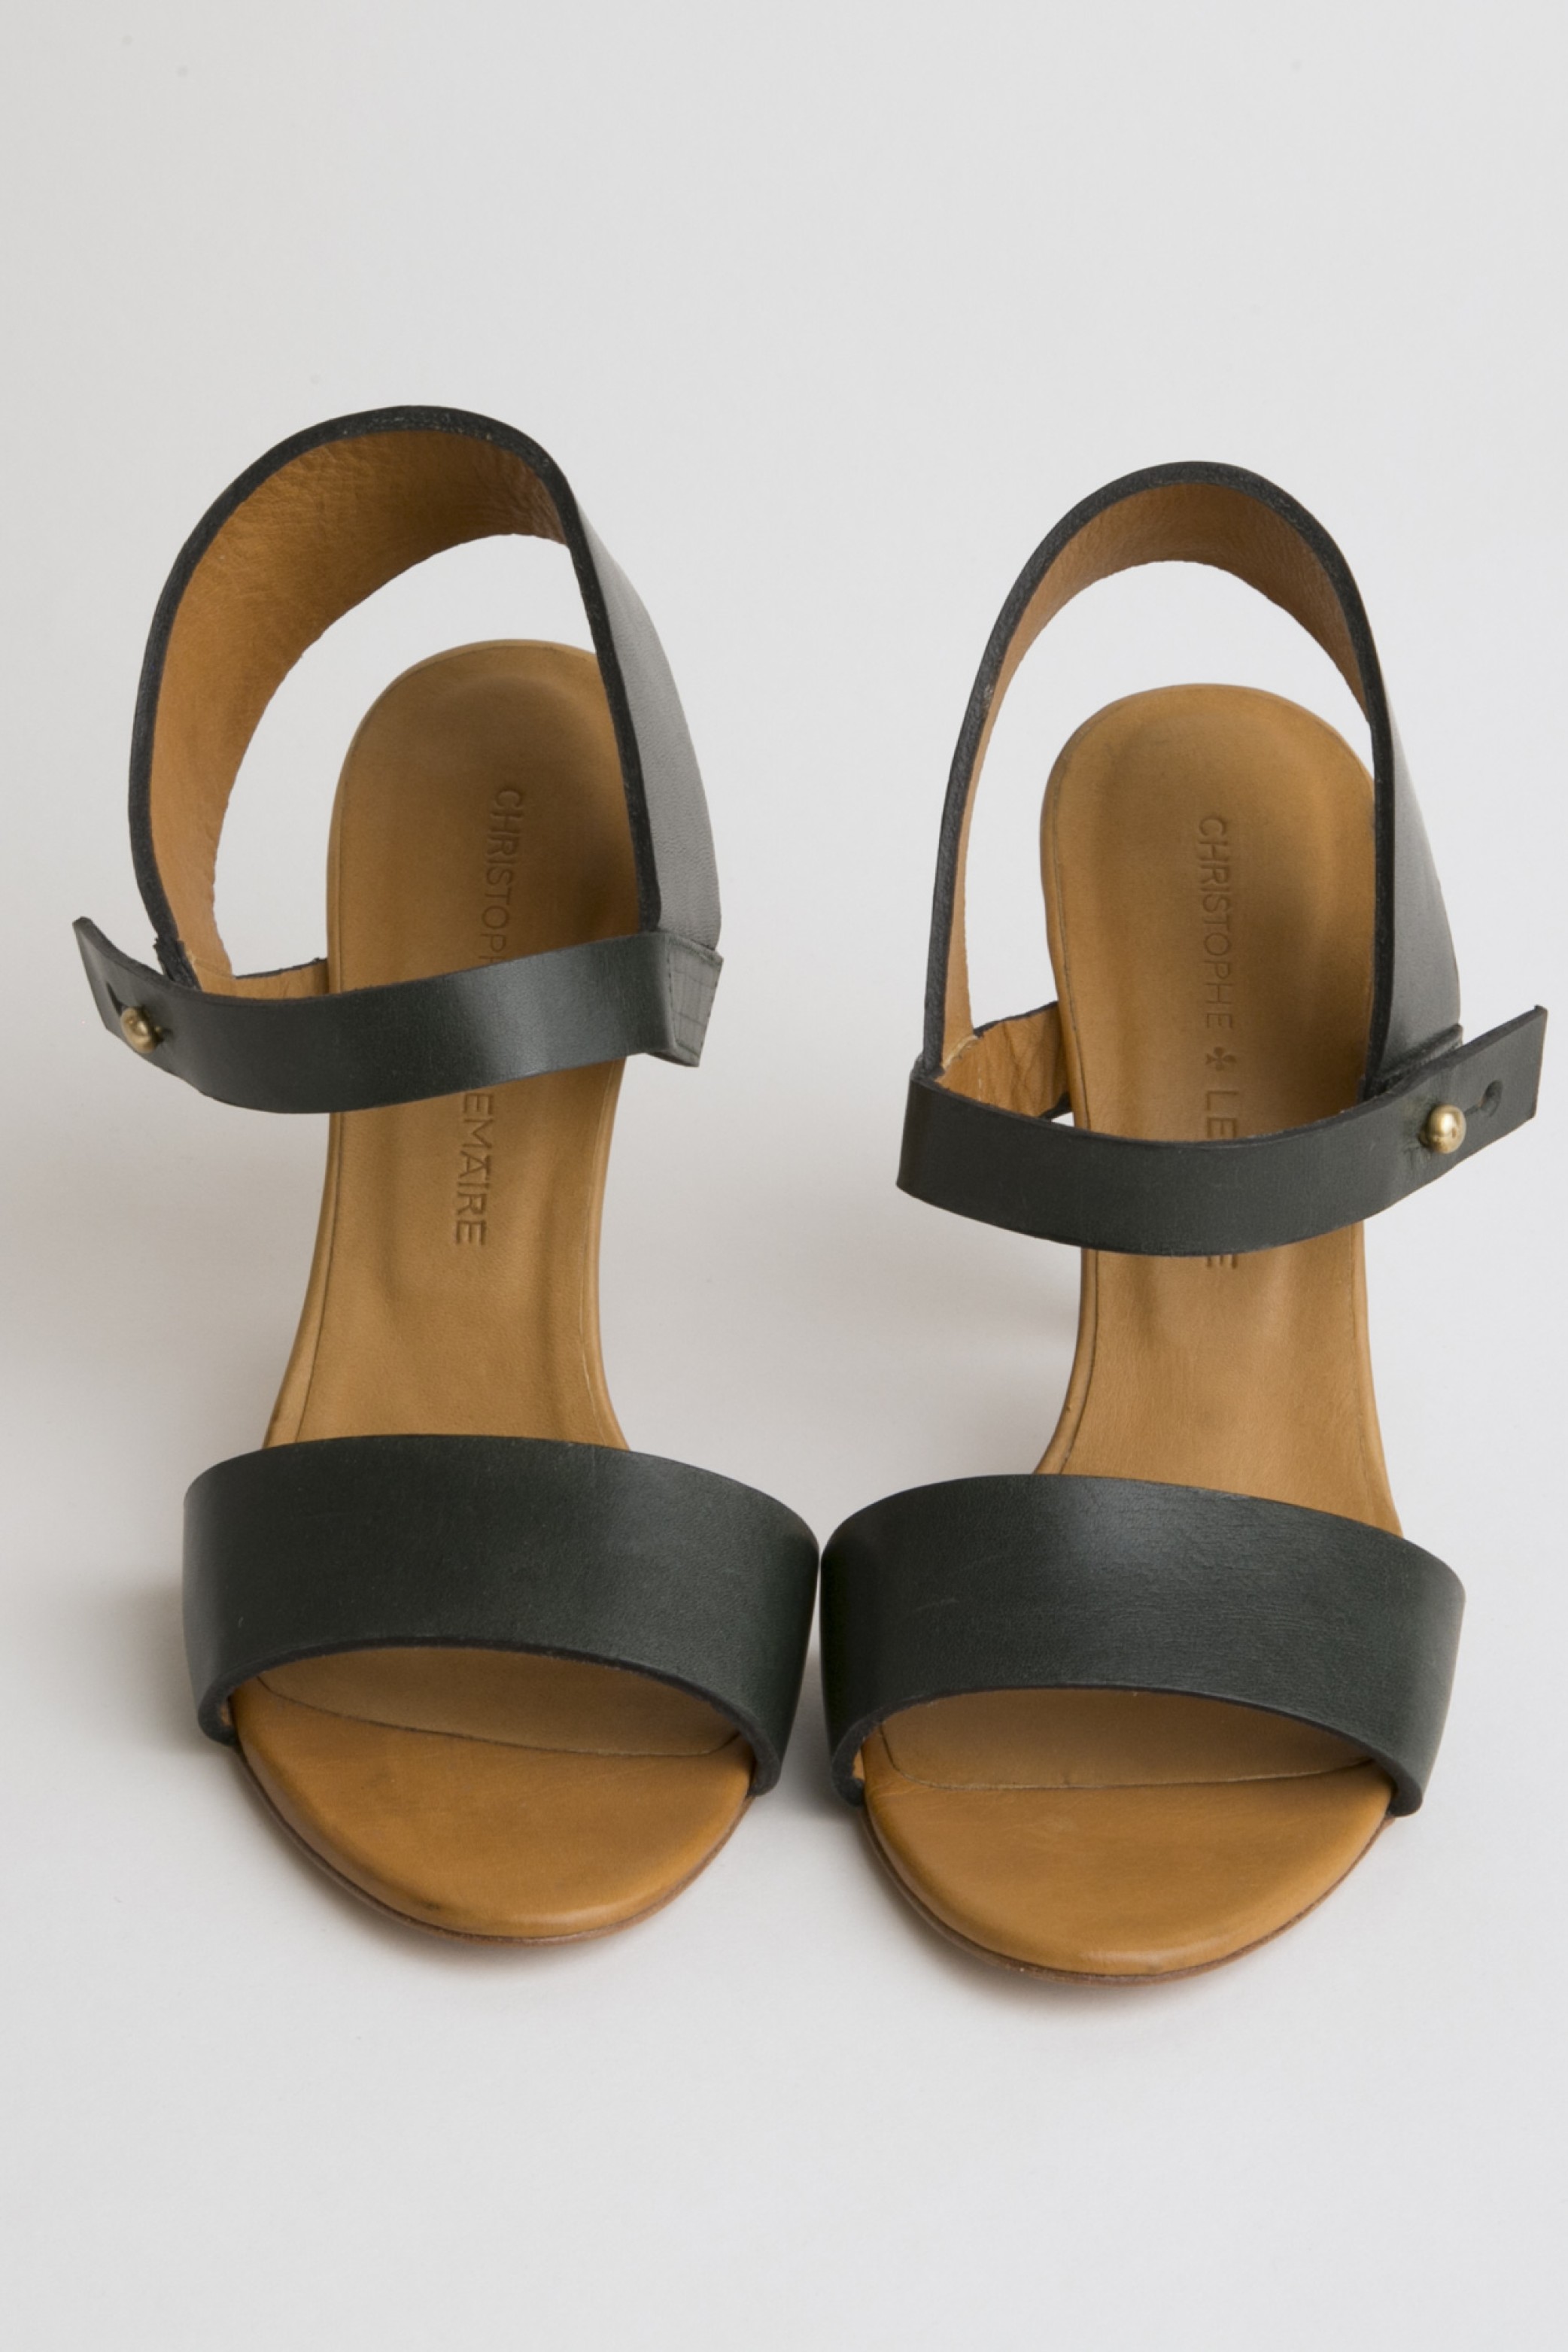 Christophe Lemaire Leather Sandals